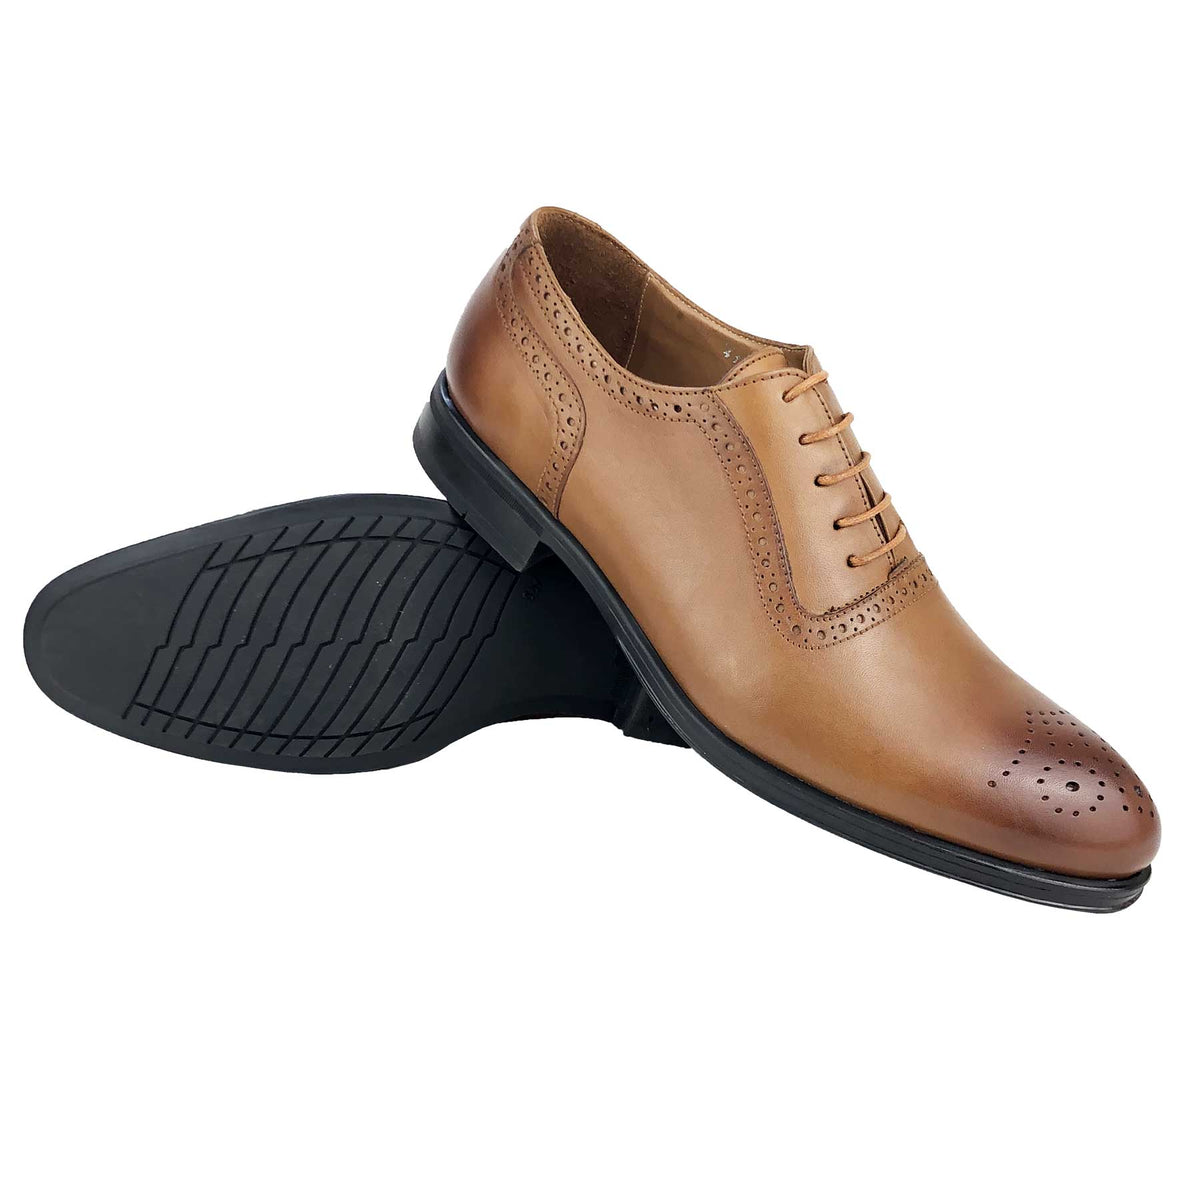 CH412-015 - Chaussure cuir sable - deluxe-maroc